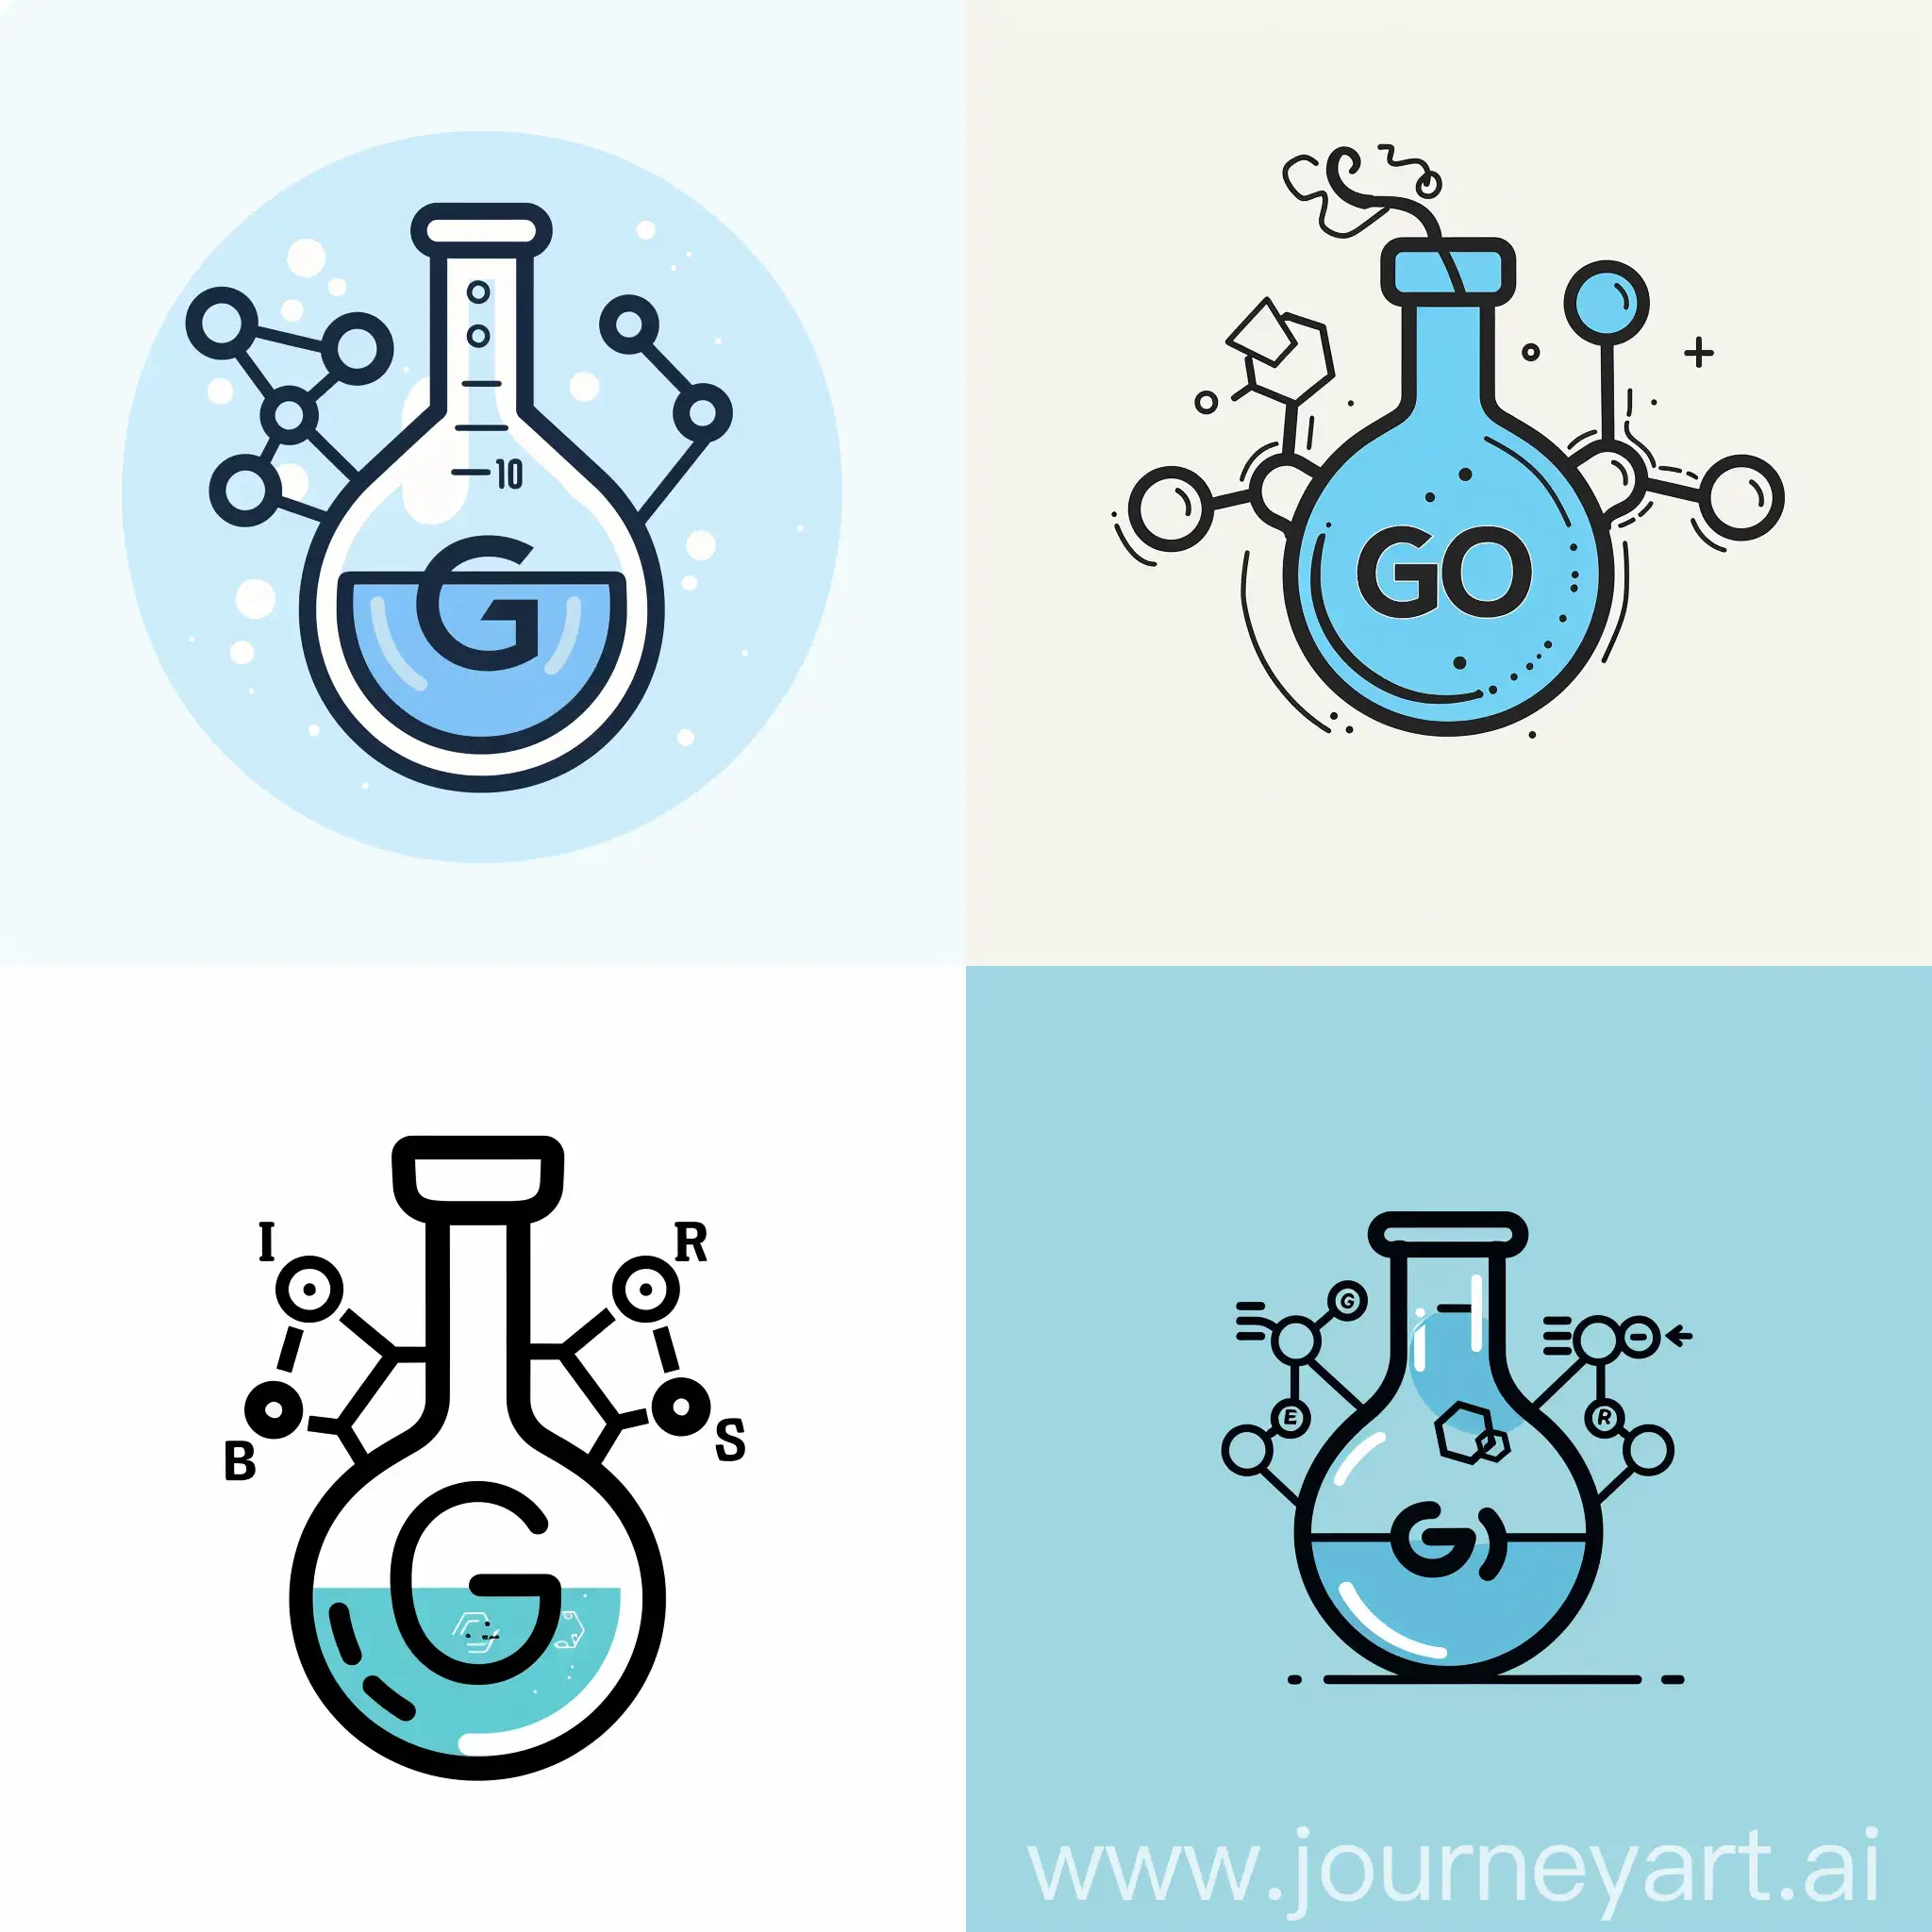 Minimalistic-Graphic-Logo-Light-Blue-Glass-Chemical-Flask-with-Bold-Black-GO-Inscription-and-Organic-Compound-Formulas